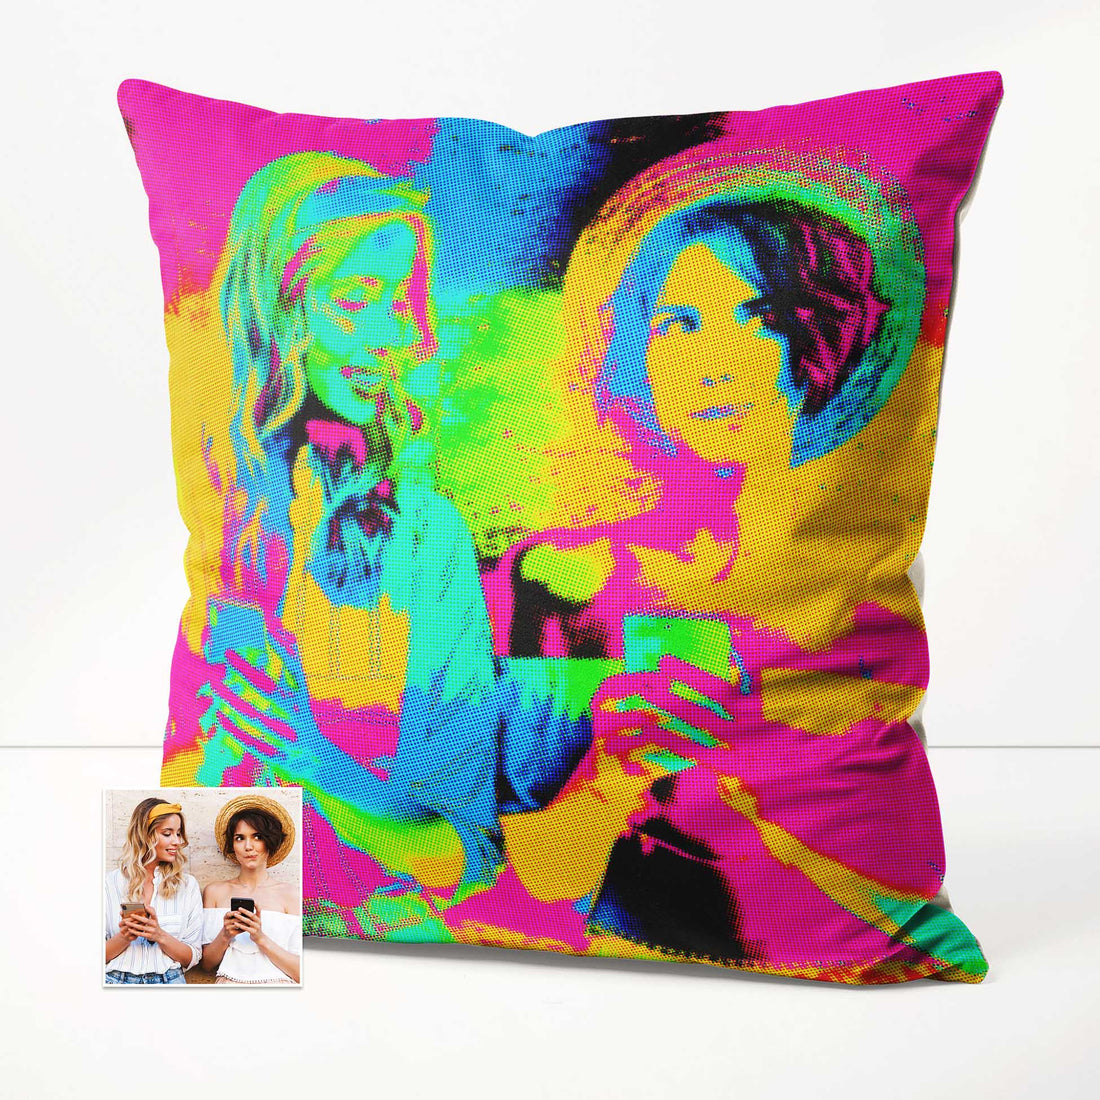 Craft a personalized retreat with a pop art cushion, combining comfort and individuality with vibrant colors and personalized patterns